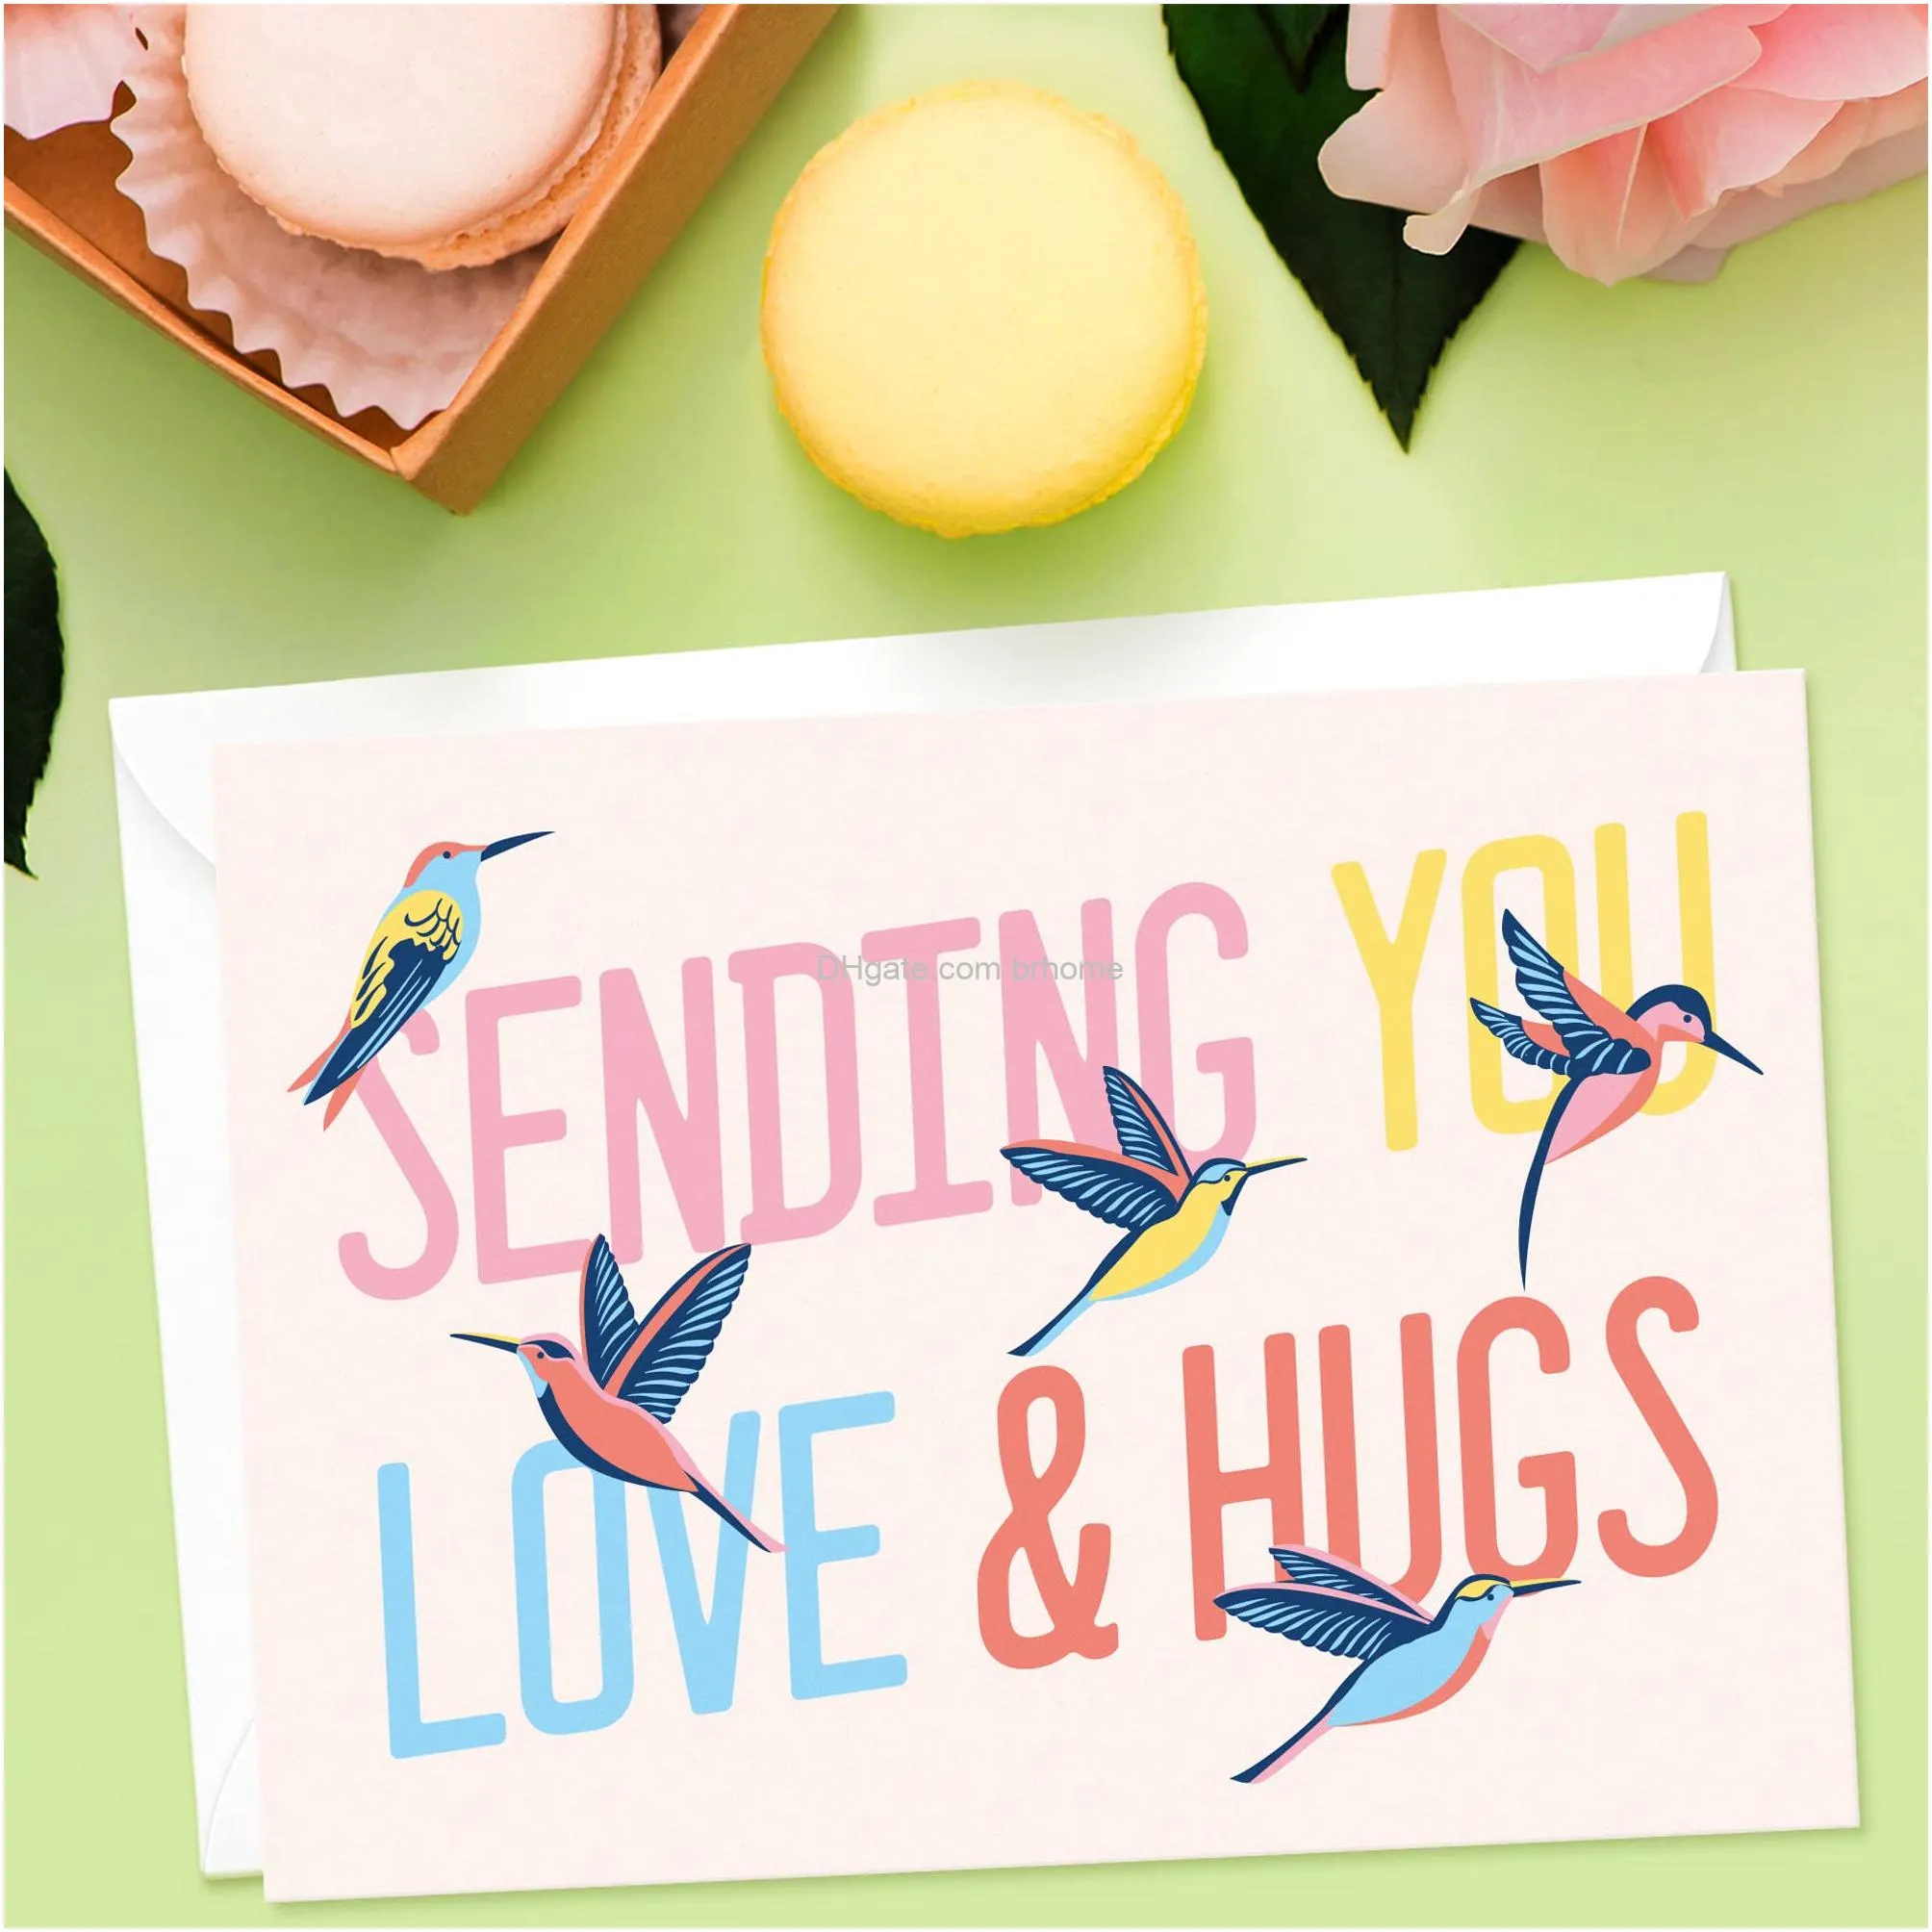 thinking of you cards with envelopes set of 24 boxed greeting cards thinking of you assortment blank 300gsm note cards and envelopes 120gsm just because cards and kindness cards